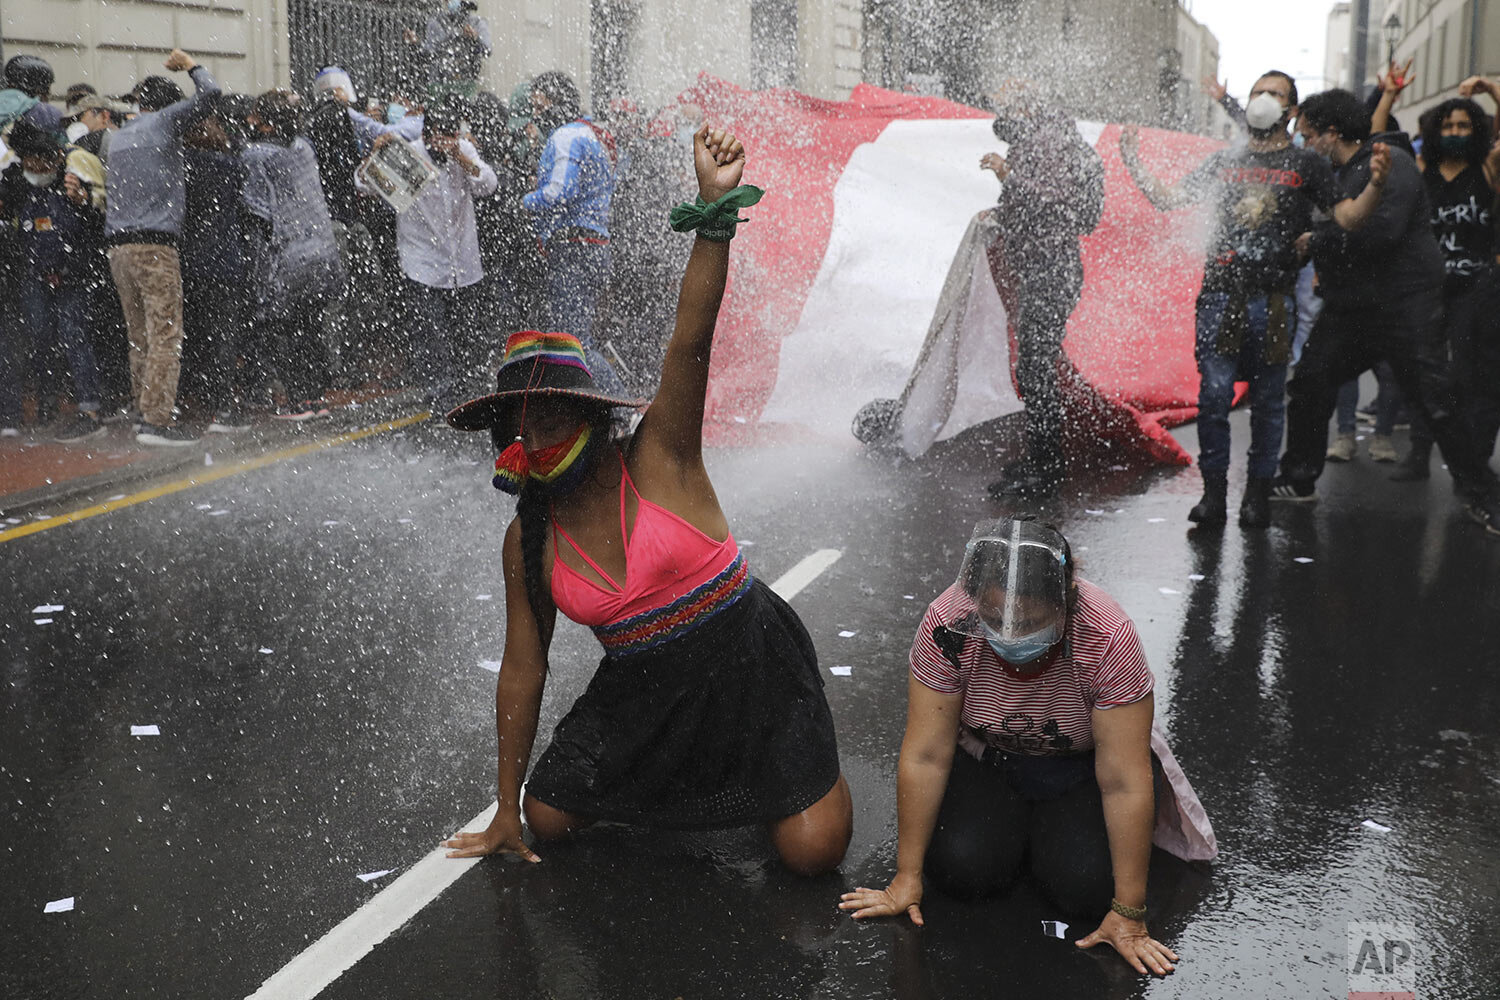  Protesters are kept back by a police water cannon as they protest lawmakers' removal of President Martin Vizcarra, near Congress in Lima, Peru, Tuesday, Nov. 10, 2020.  (AP Photo/Rodrigo Abd) 